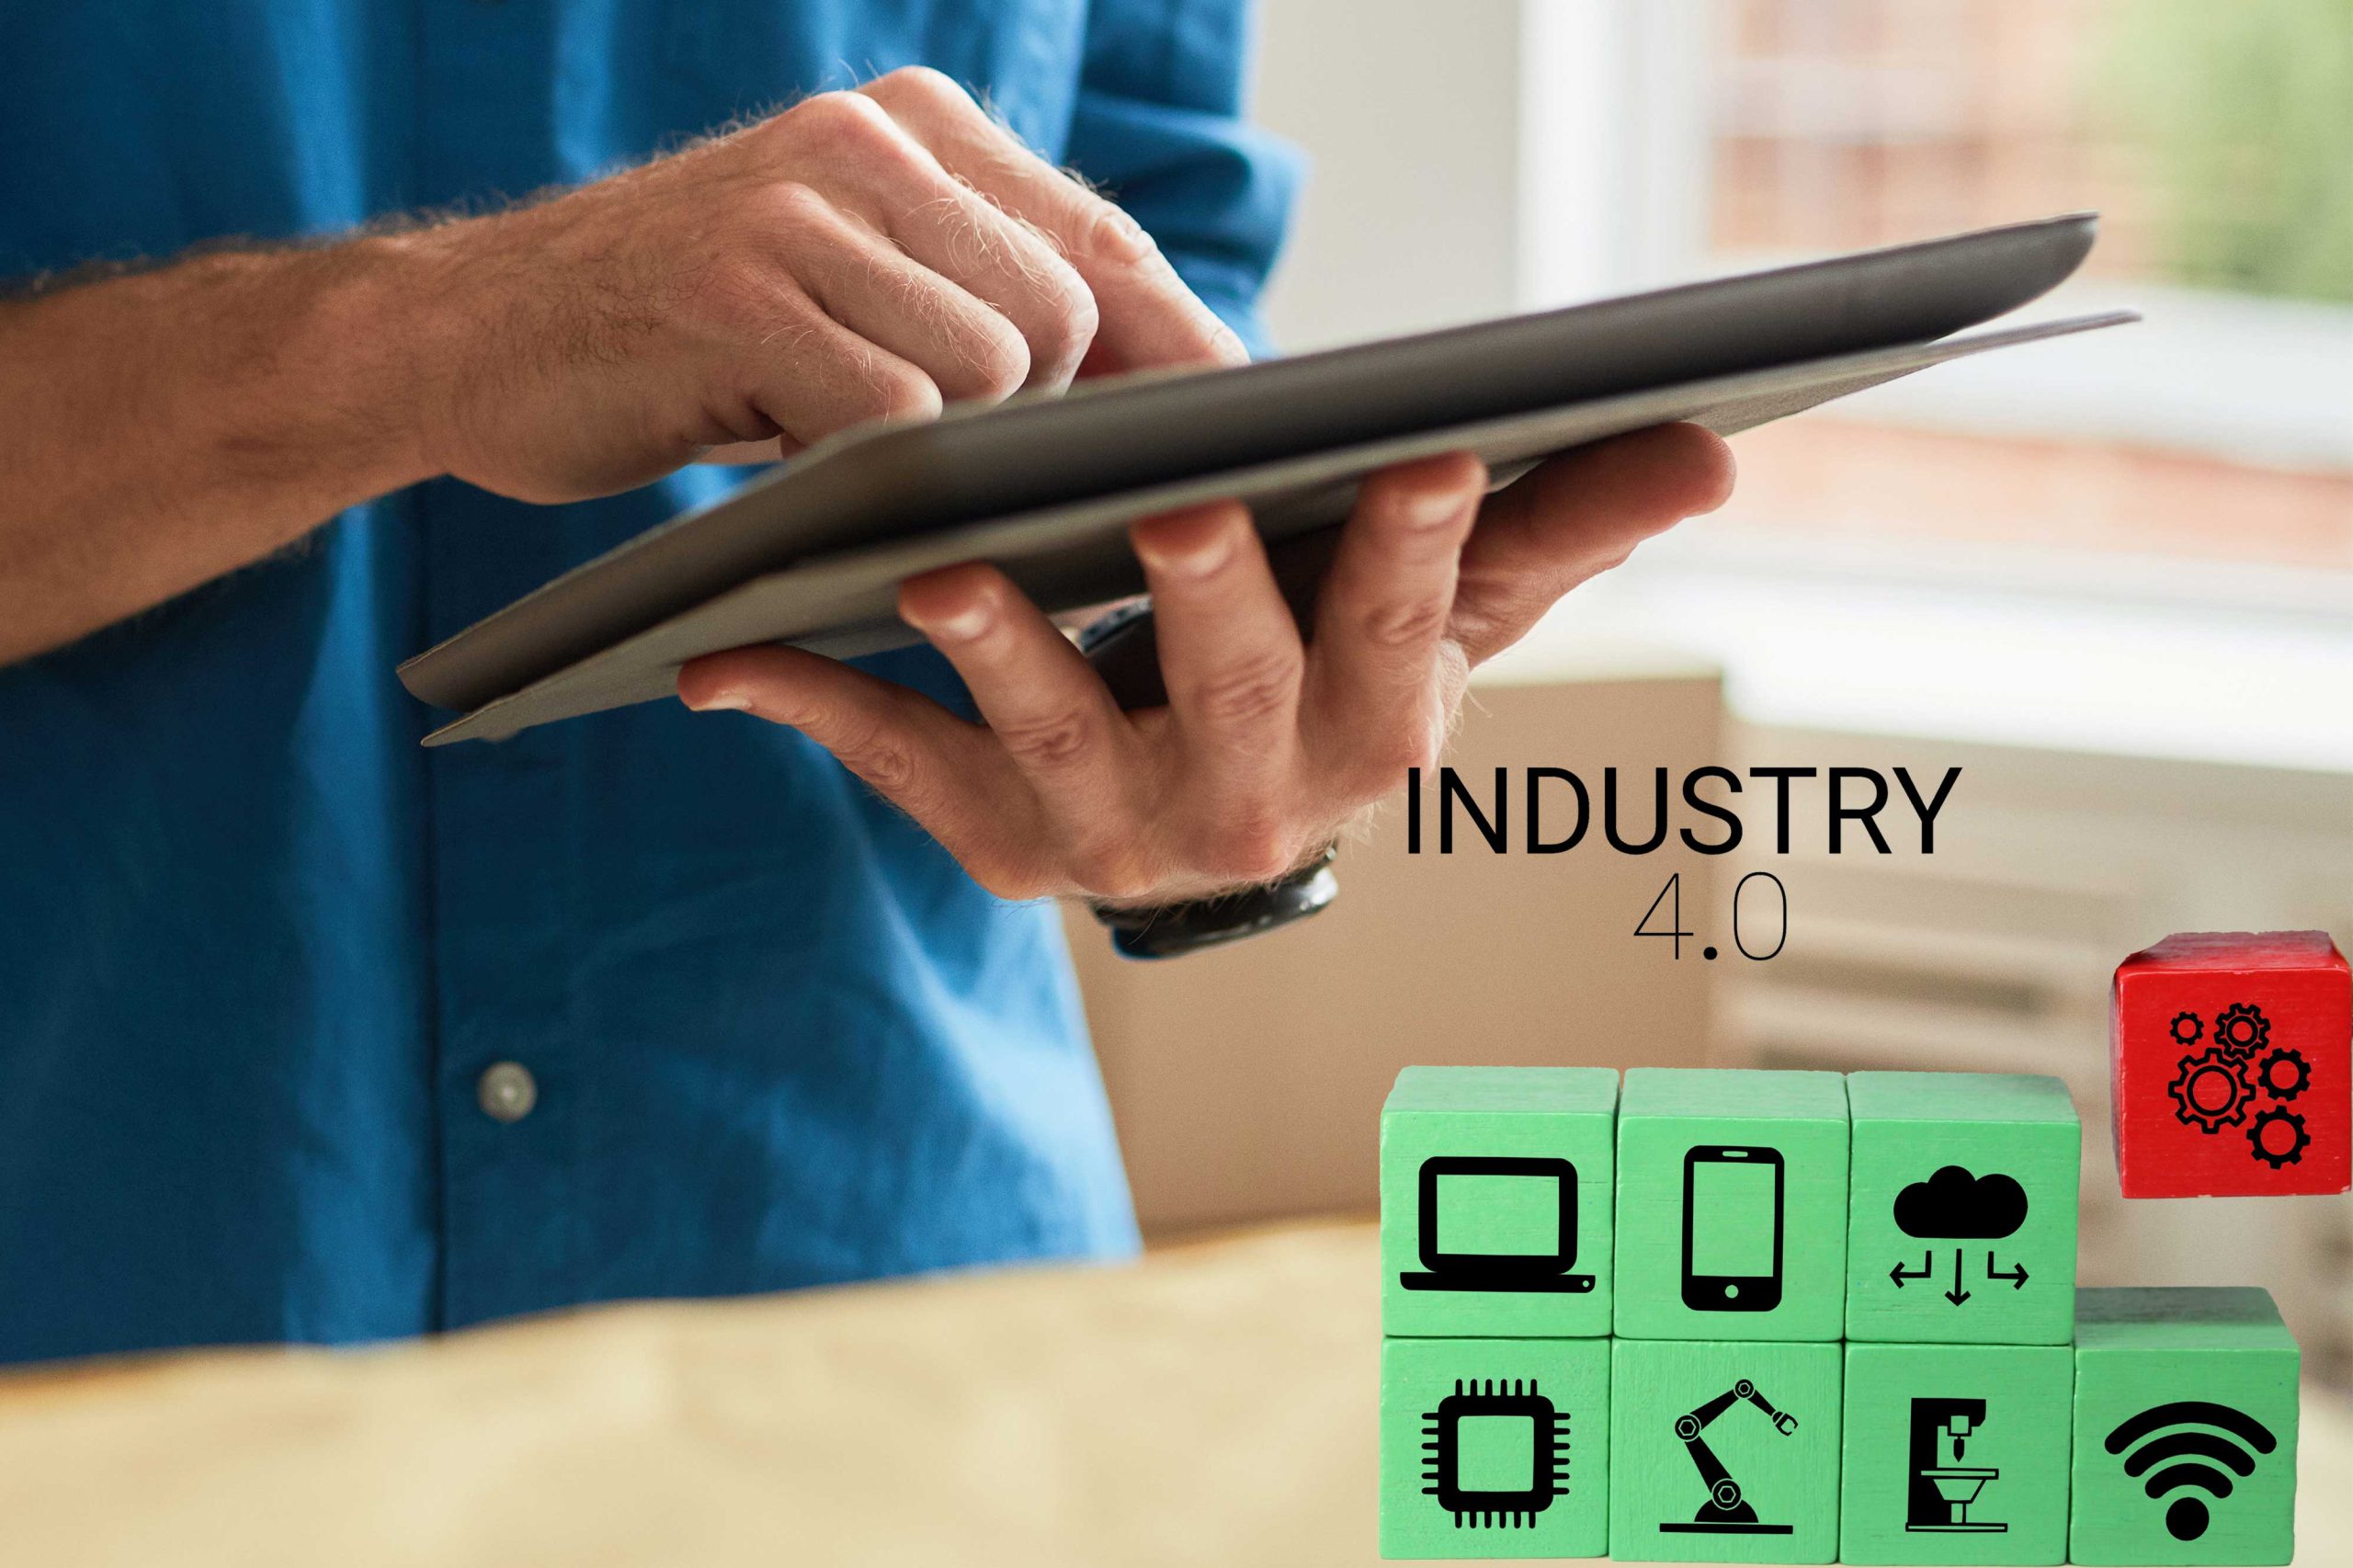 Services sector in Industry 4.0: Digitizing Services with Fox ERP